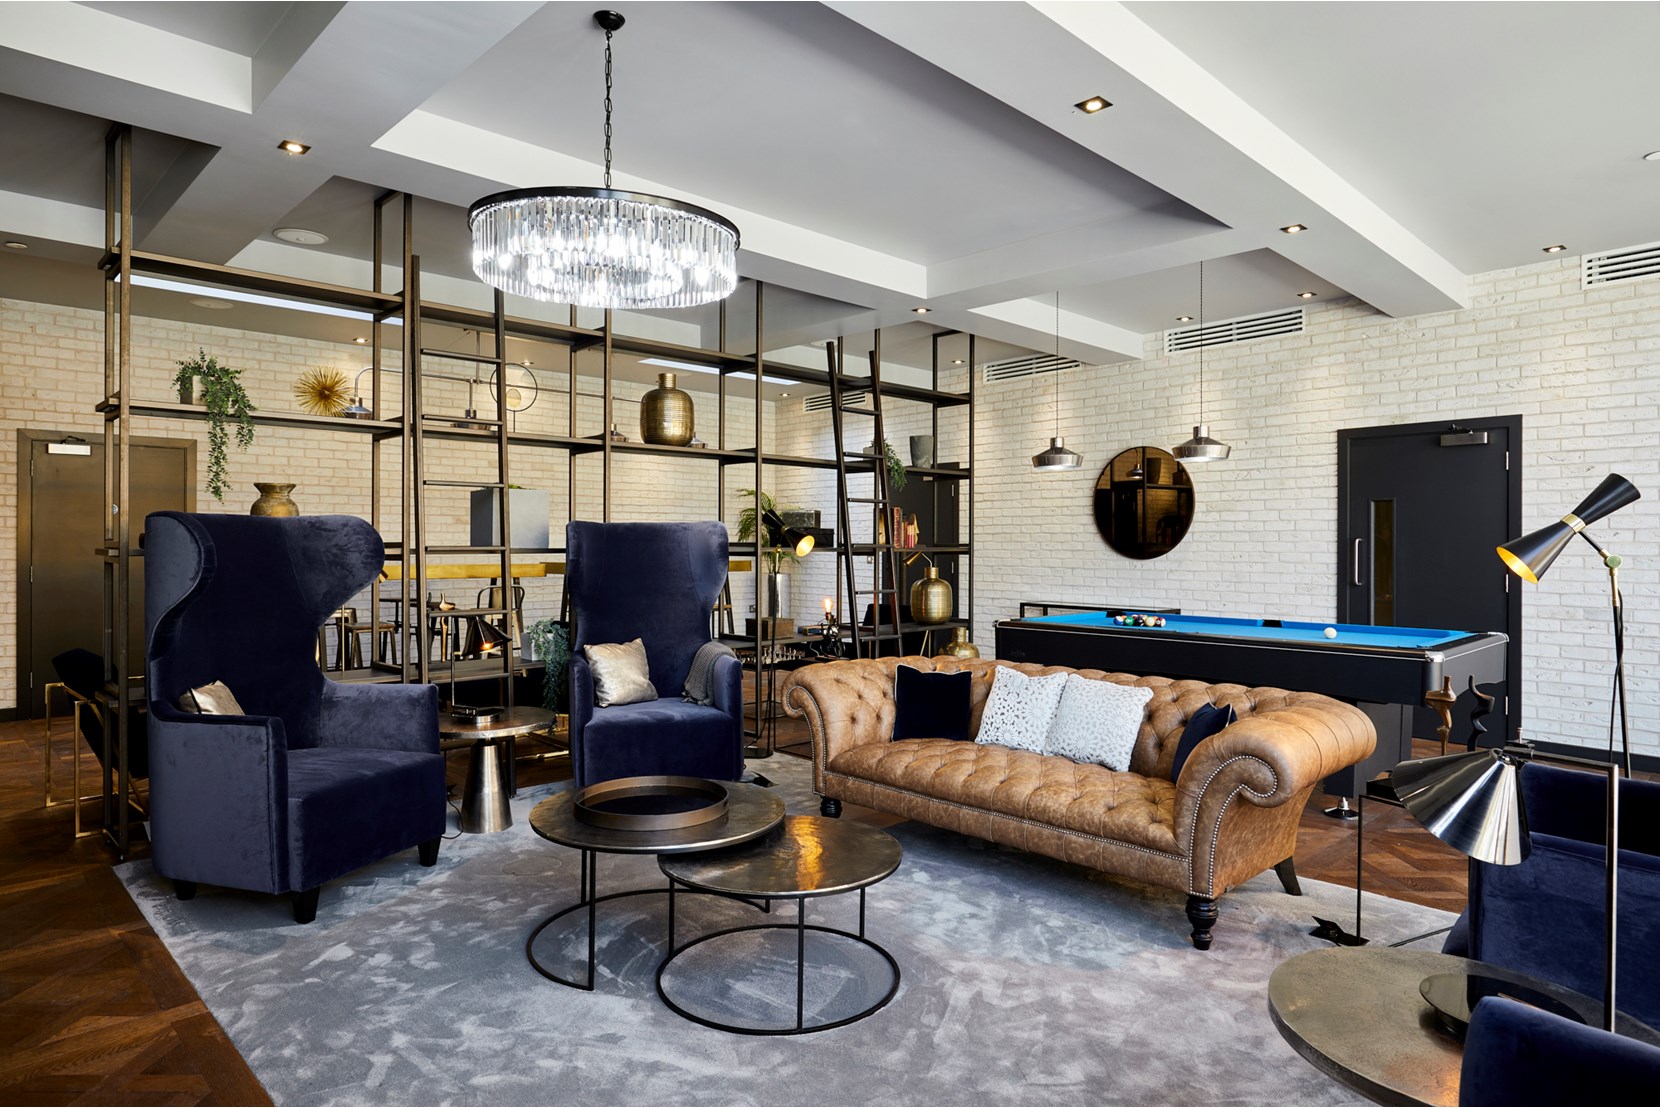 Apartments to Rent by Savills at The Forge, Newham, E6, communal lounge area